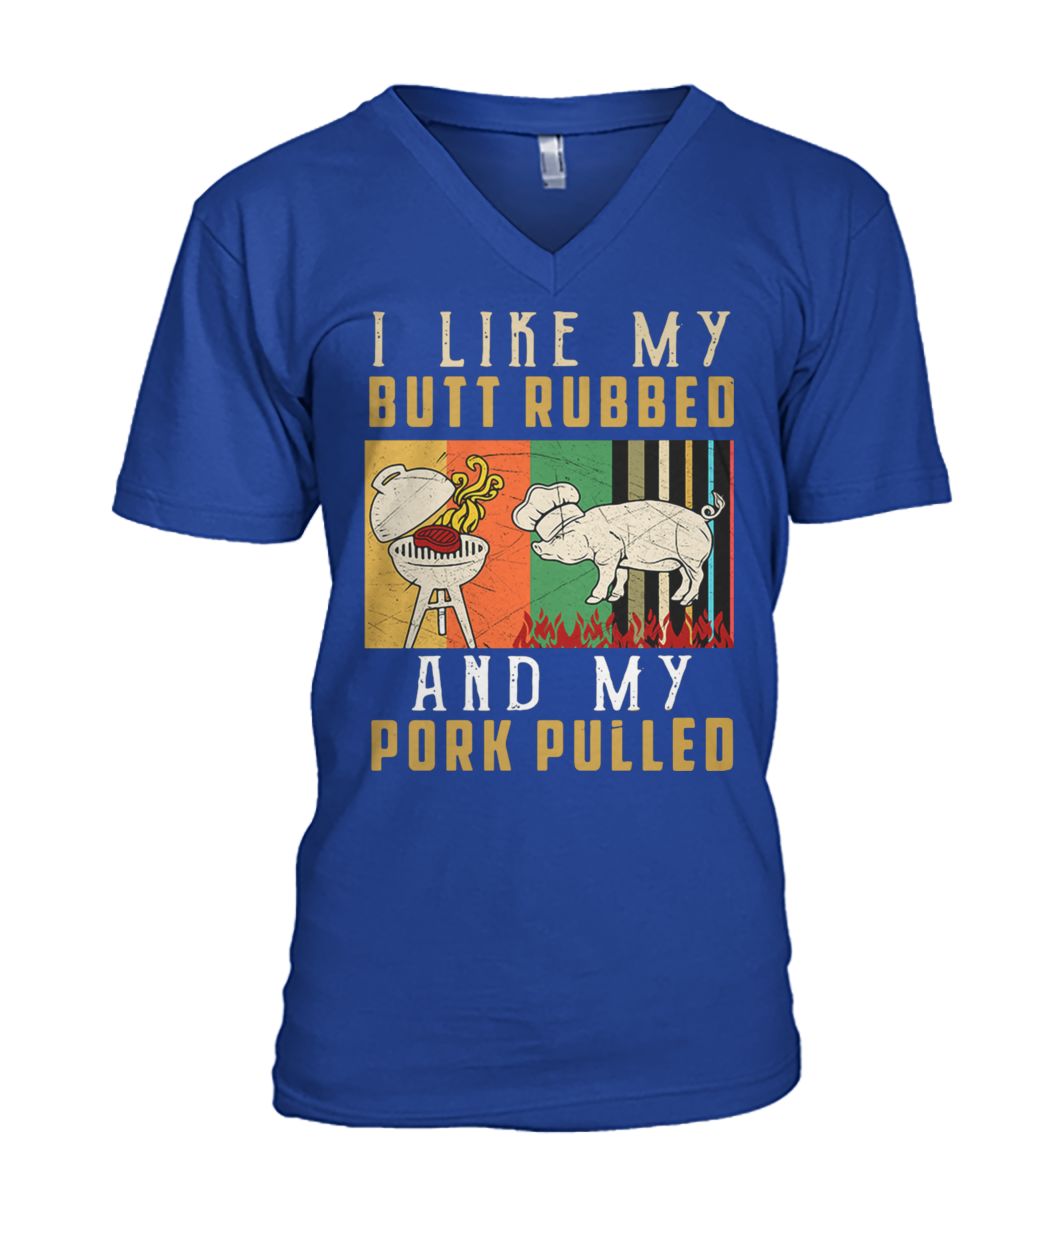 I like my butt rubbed and my pork pulled mens v-neck